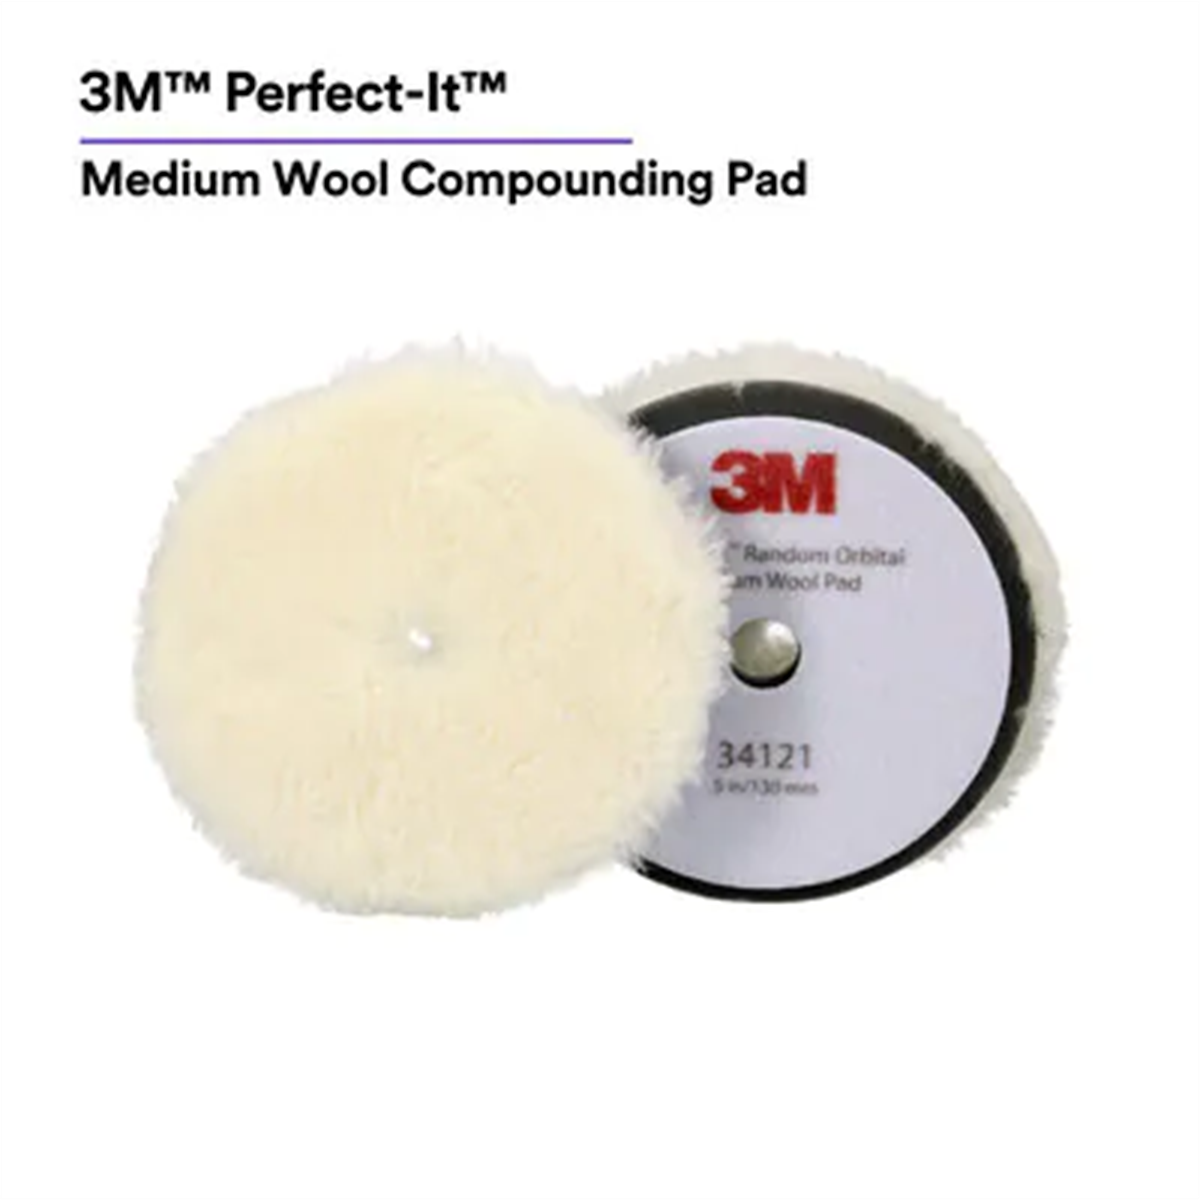 Picture of 3M MMM34121 5 in. Perfect-It Random Orbital Medium Wool Compounding Pad, White - 2 Pads per Bag